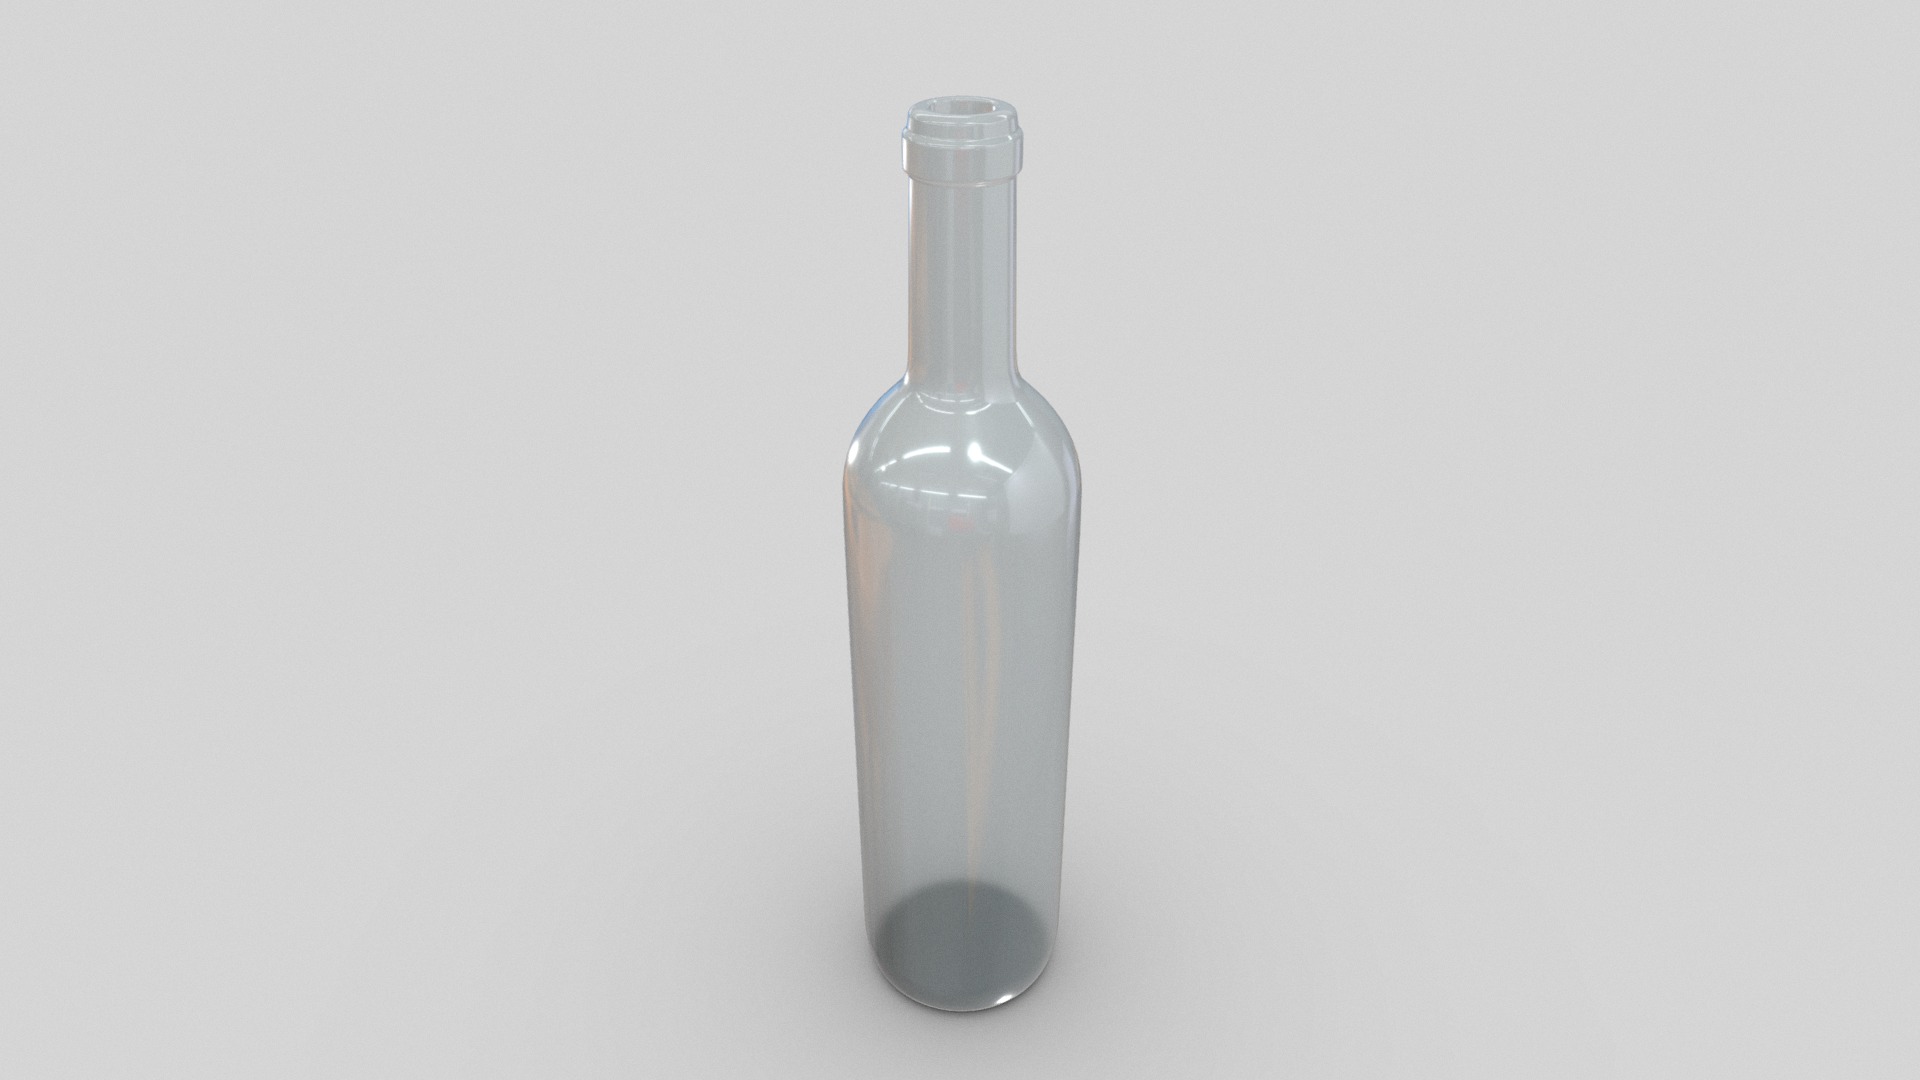 3D model Bottle empty white glass - This is a 3D model of the Bottle empty white glass. The 3D model is about a clear glass bottle.